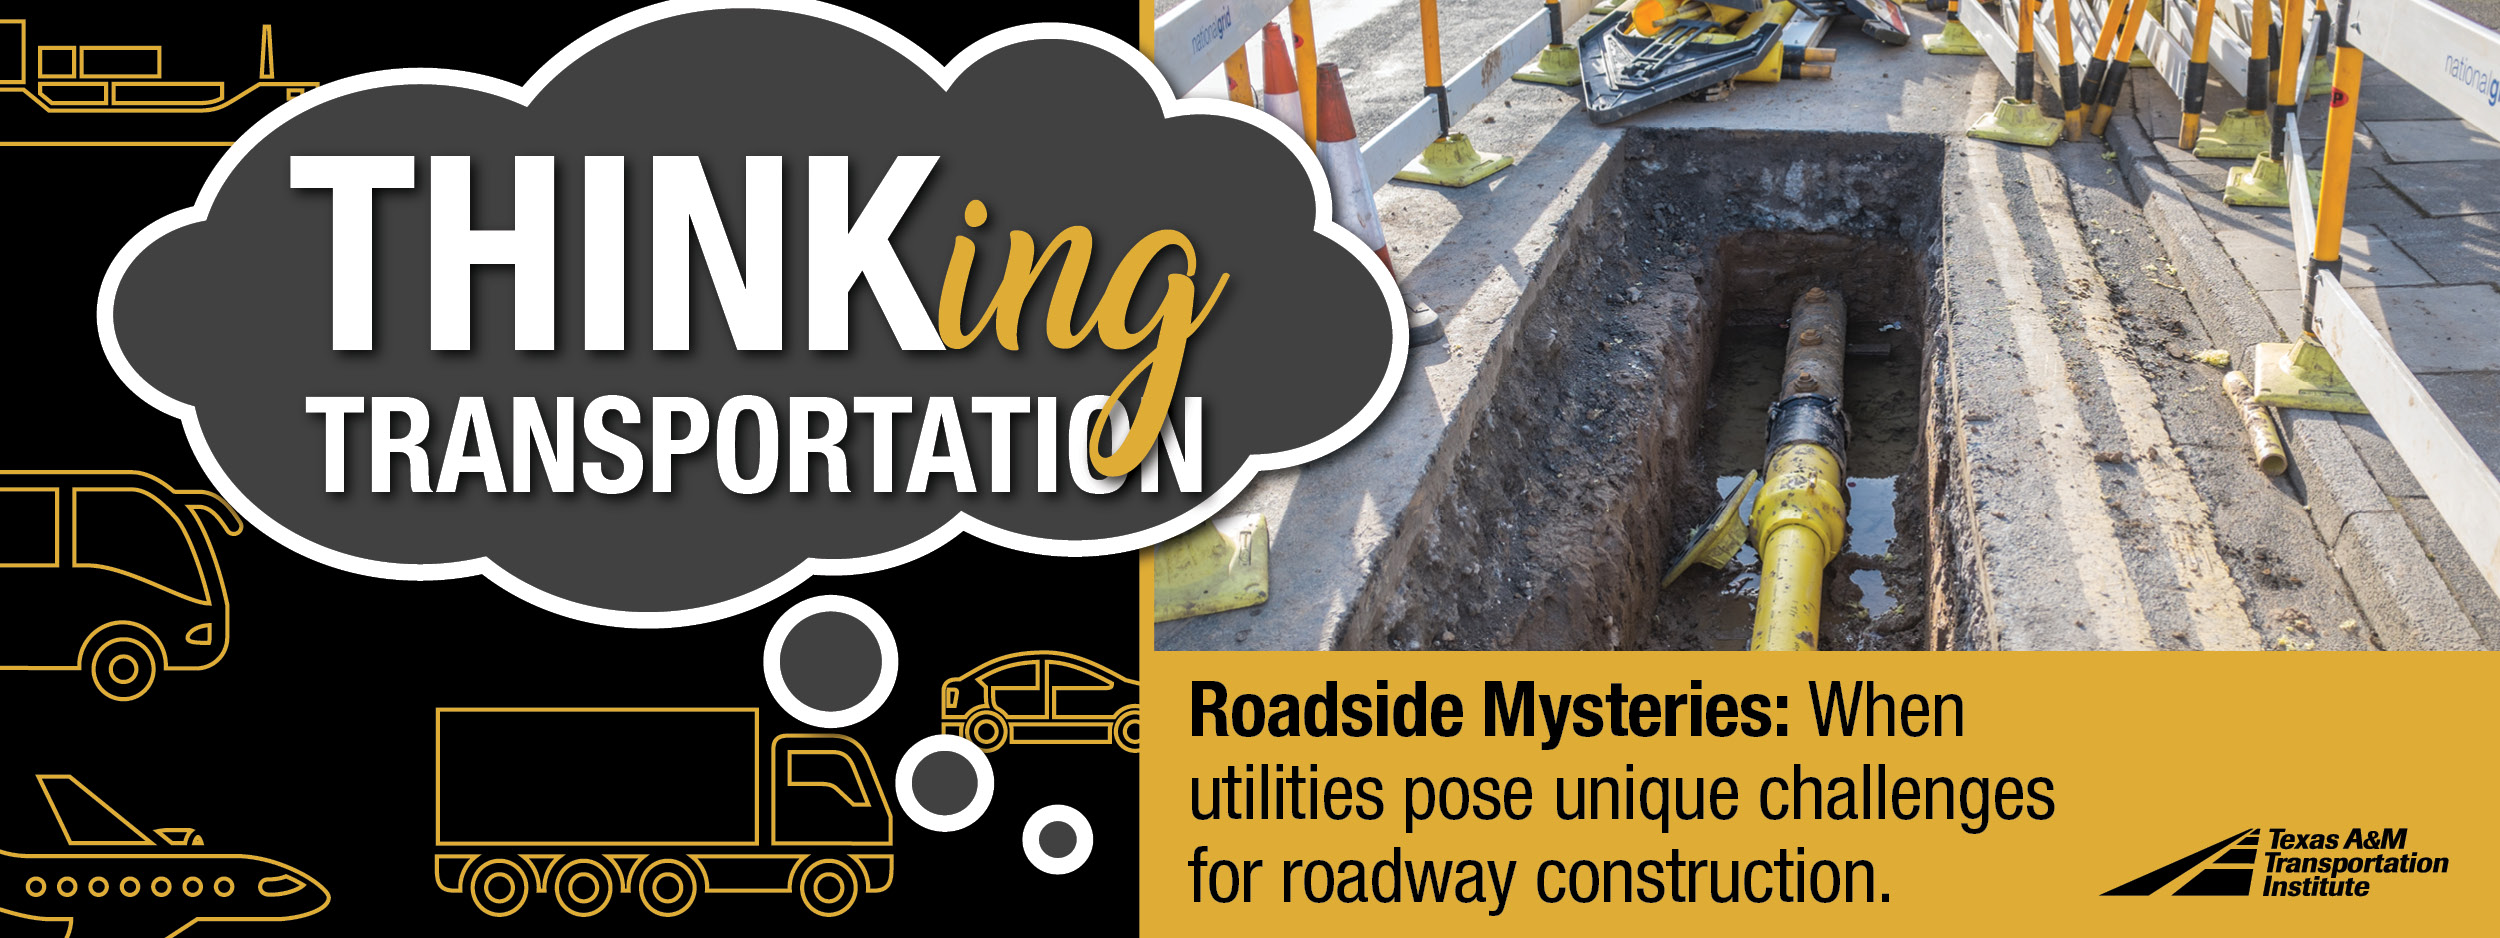 Thinking Transportation (Podcast): Roadside Mysteries: When utilities pose unique challenges for roadway construction.